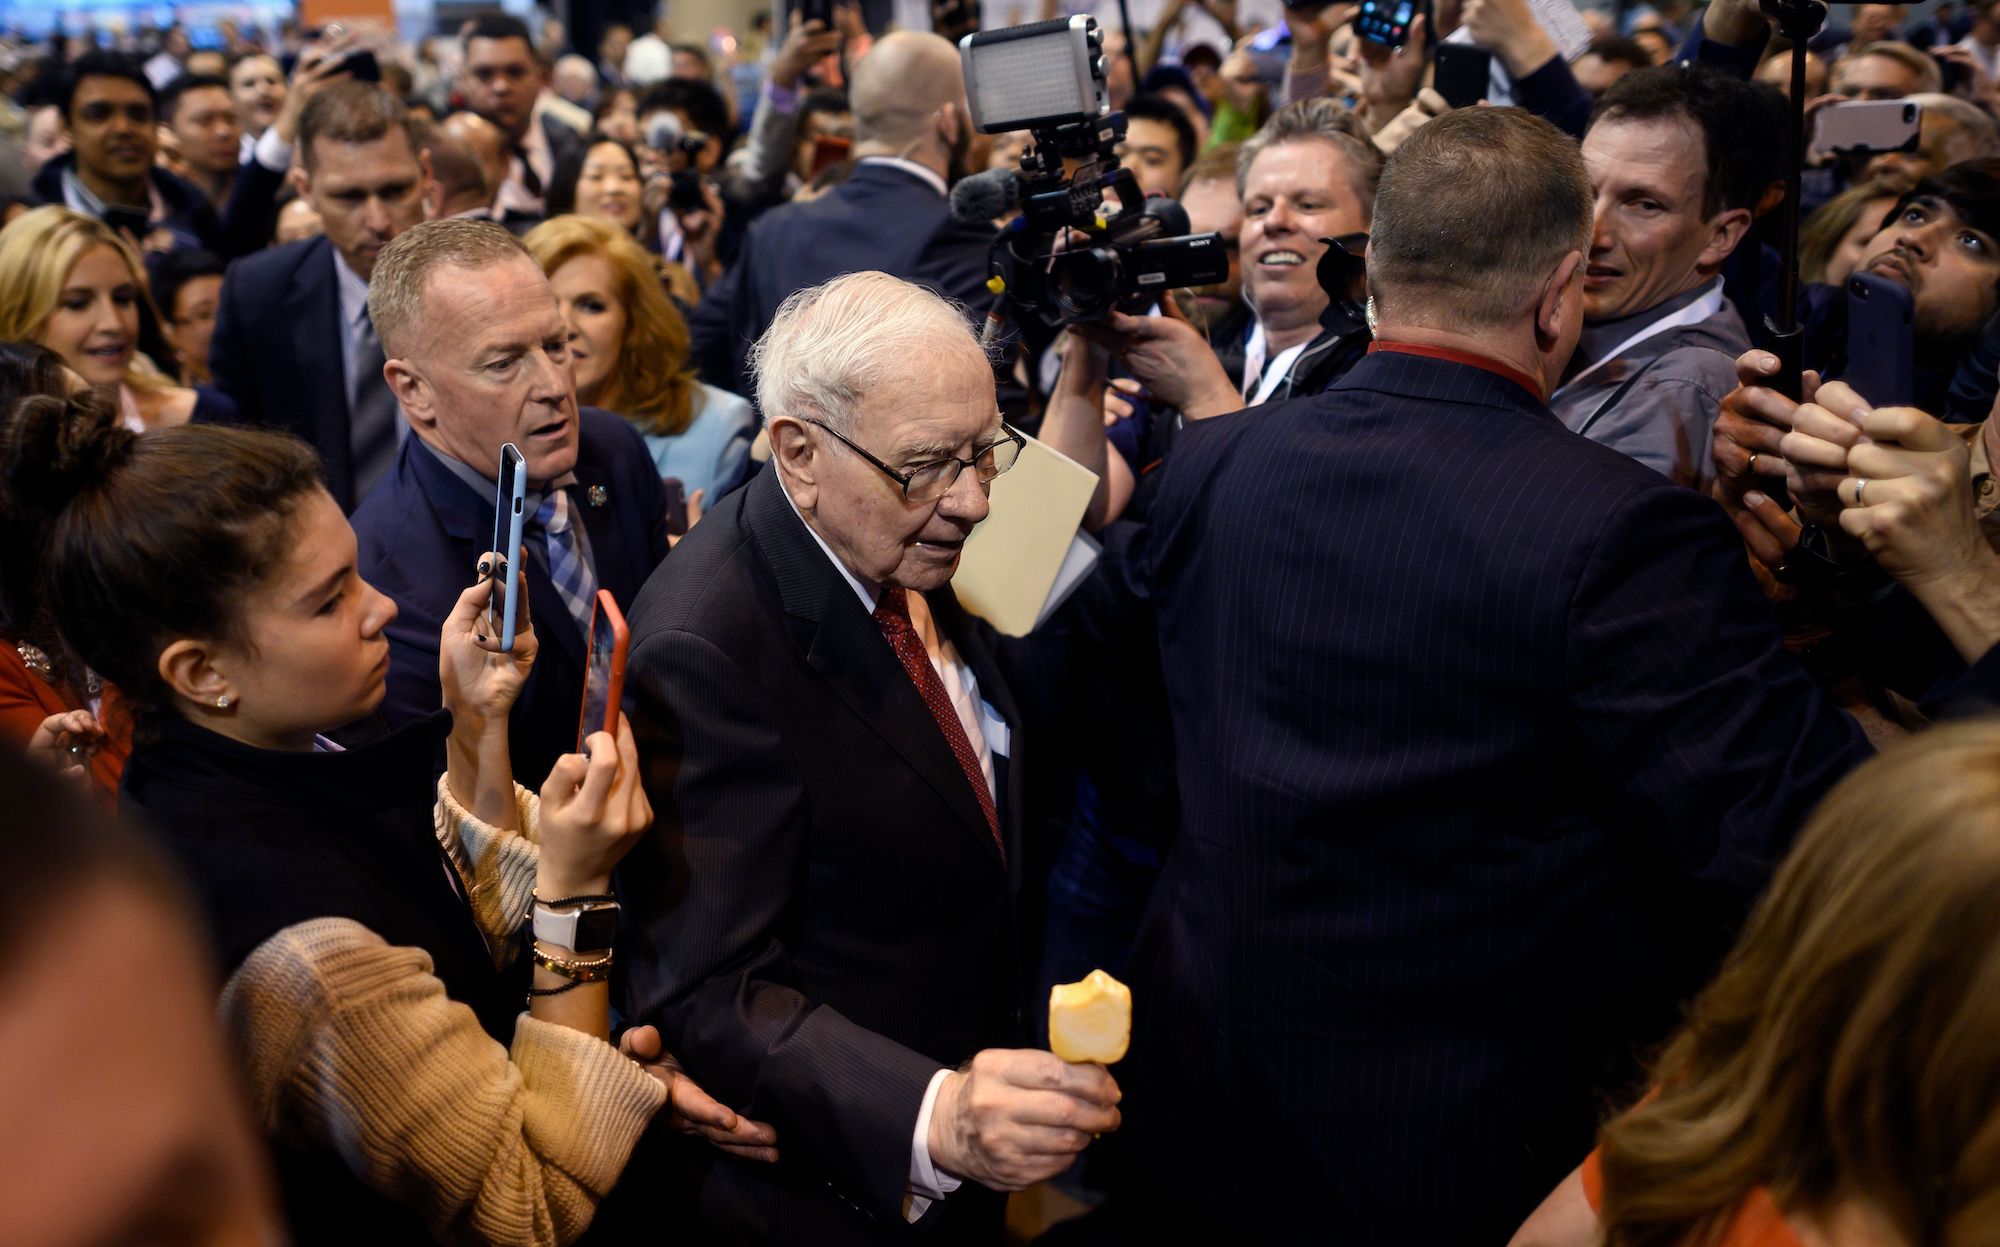 Warren Buffett (center), CEO of Berkshire Hathaway, is surrounded by press and fans as he arrives at the 2019 annual shareholders meeting in Omaha, Nebraska, on May 4, 2019